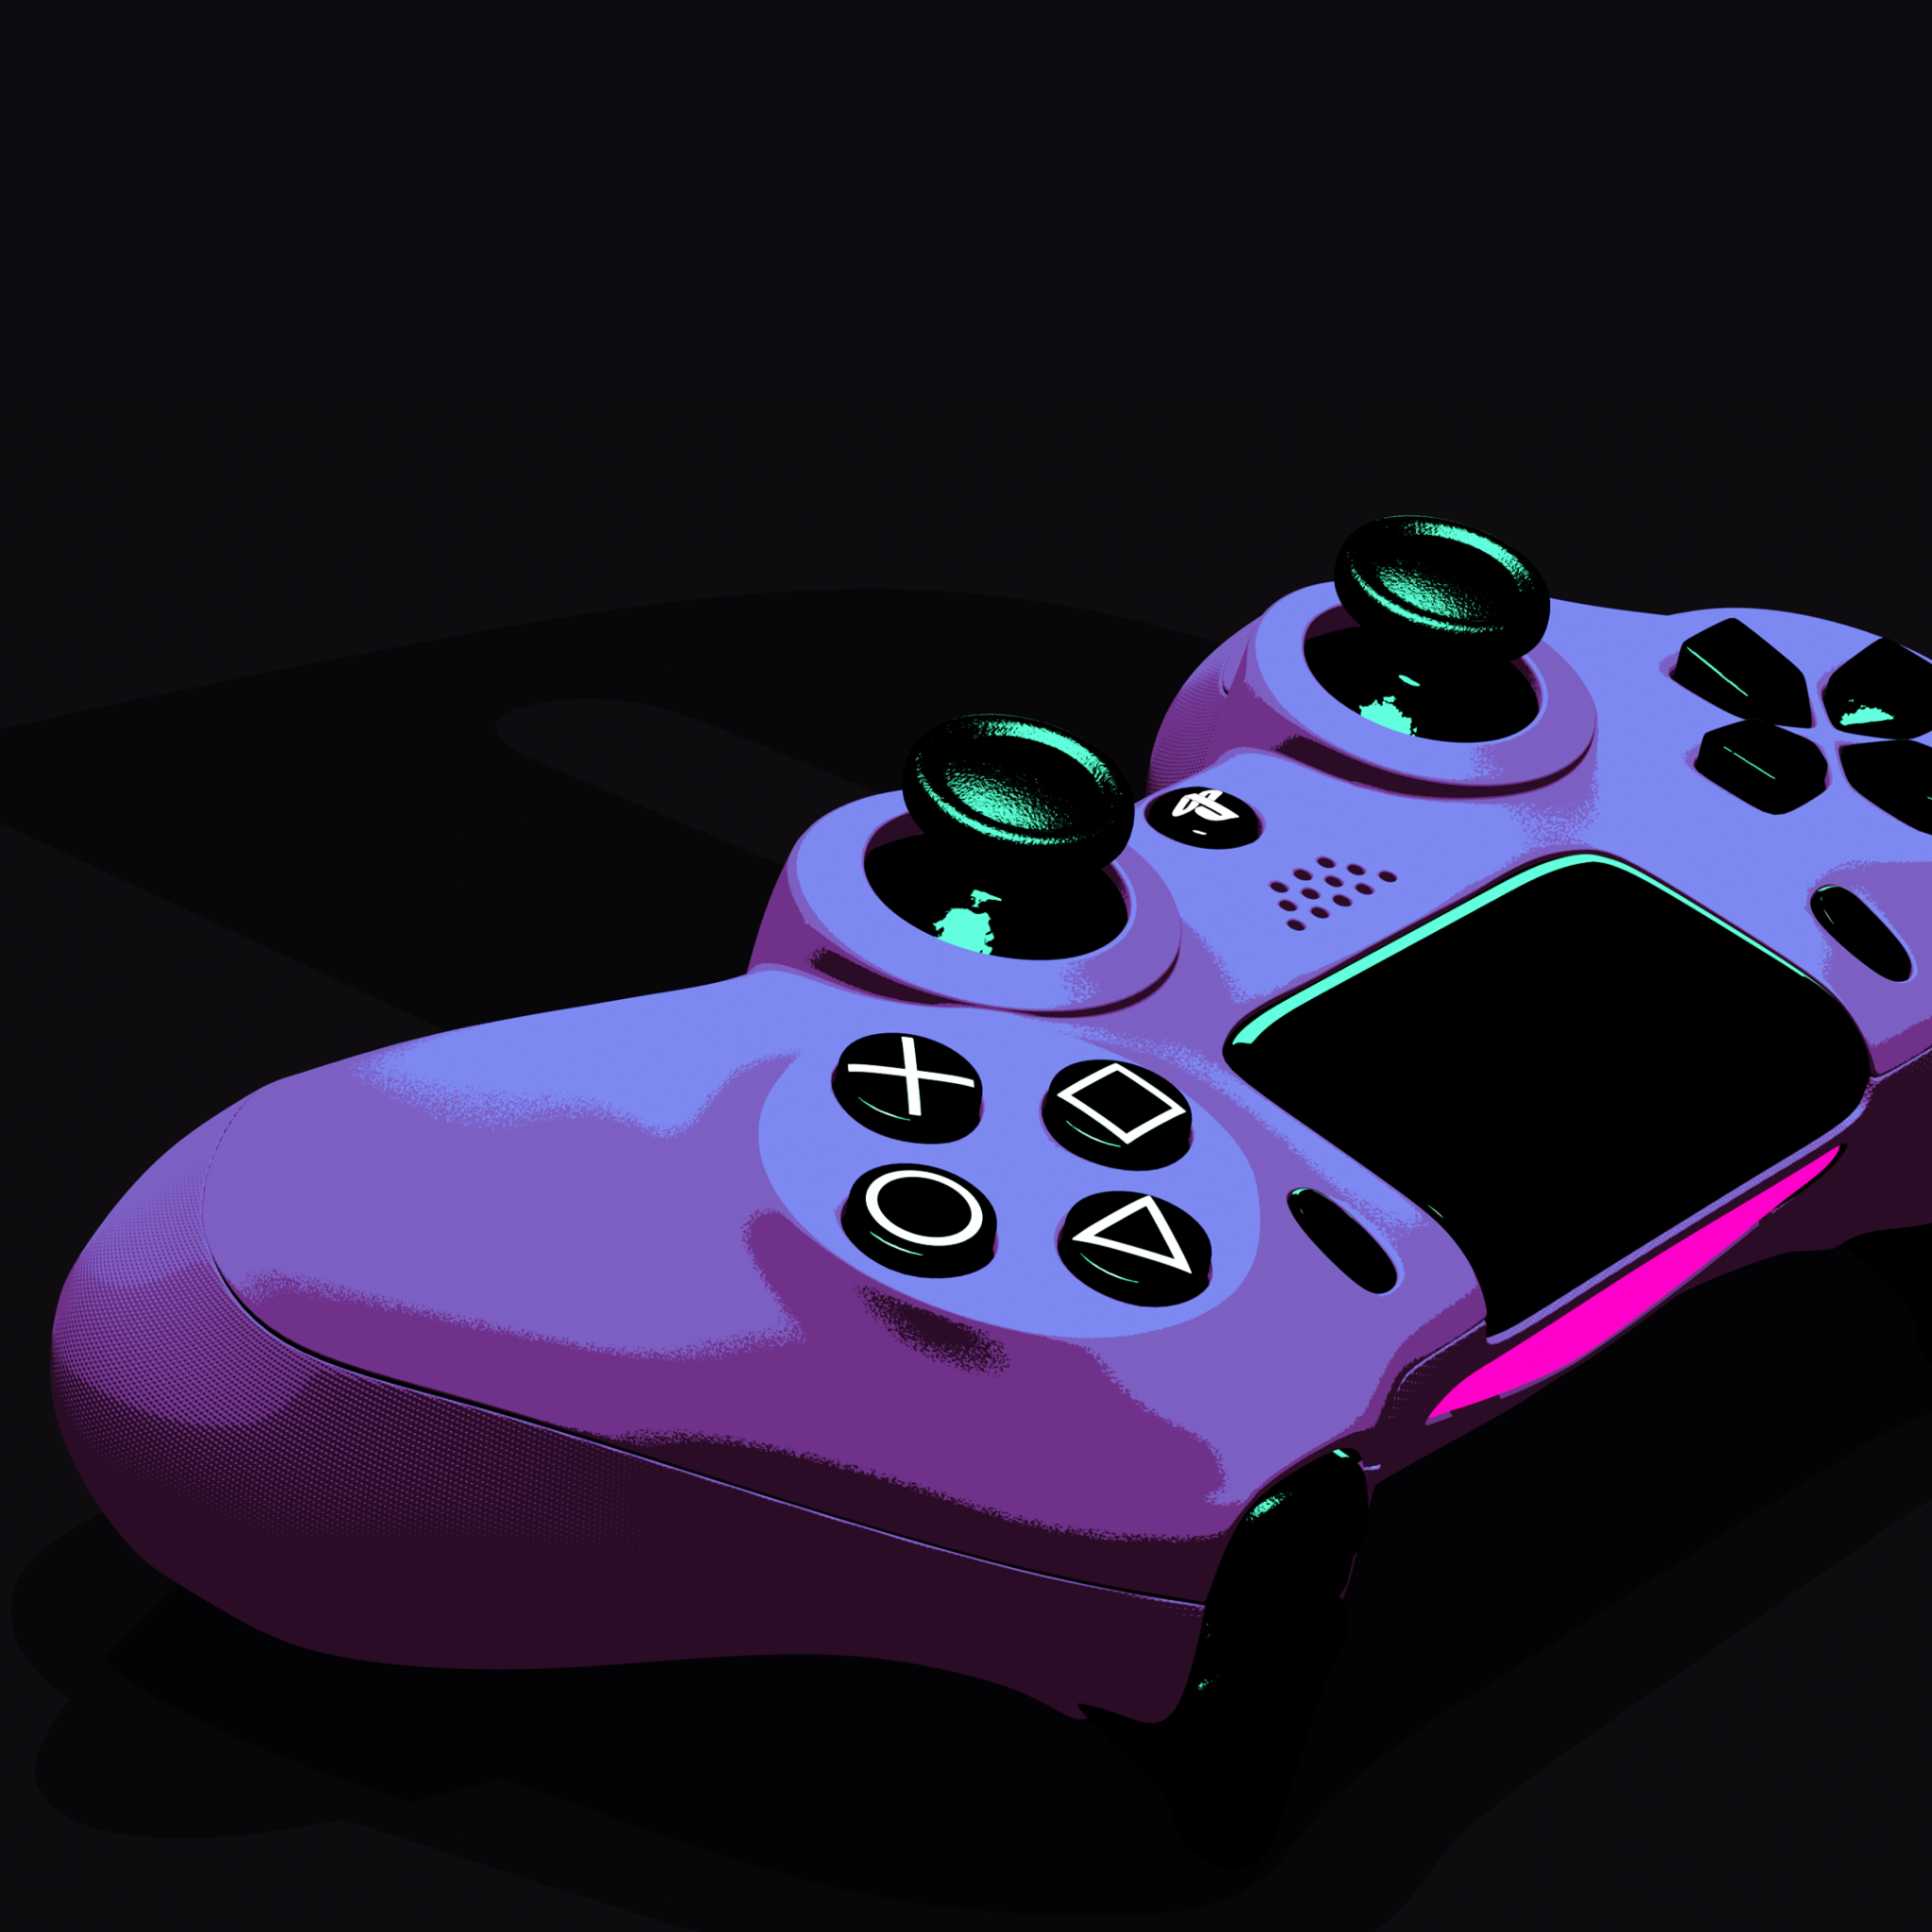 Neon Gamepad with Glitch Effect  YouTube